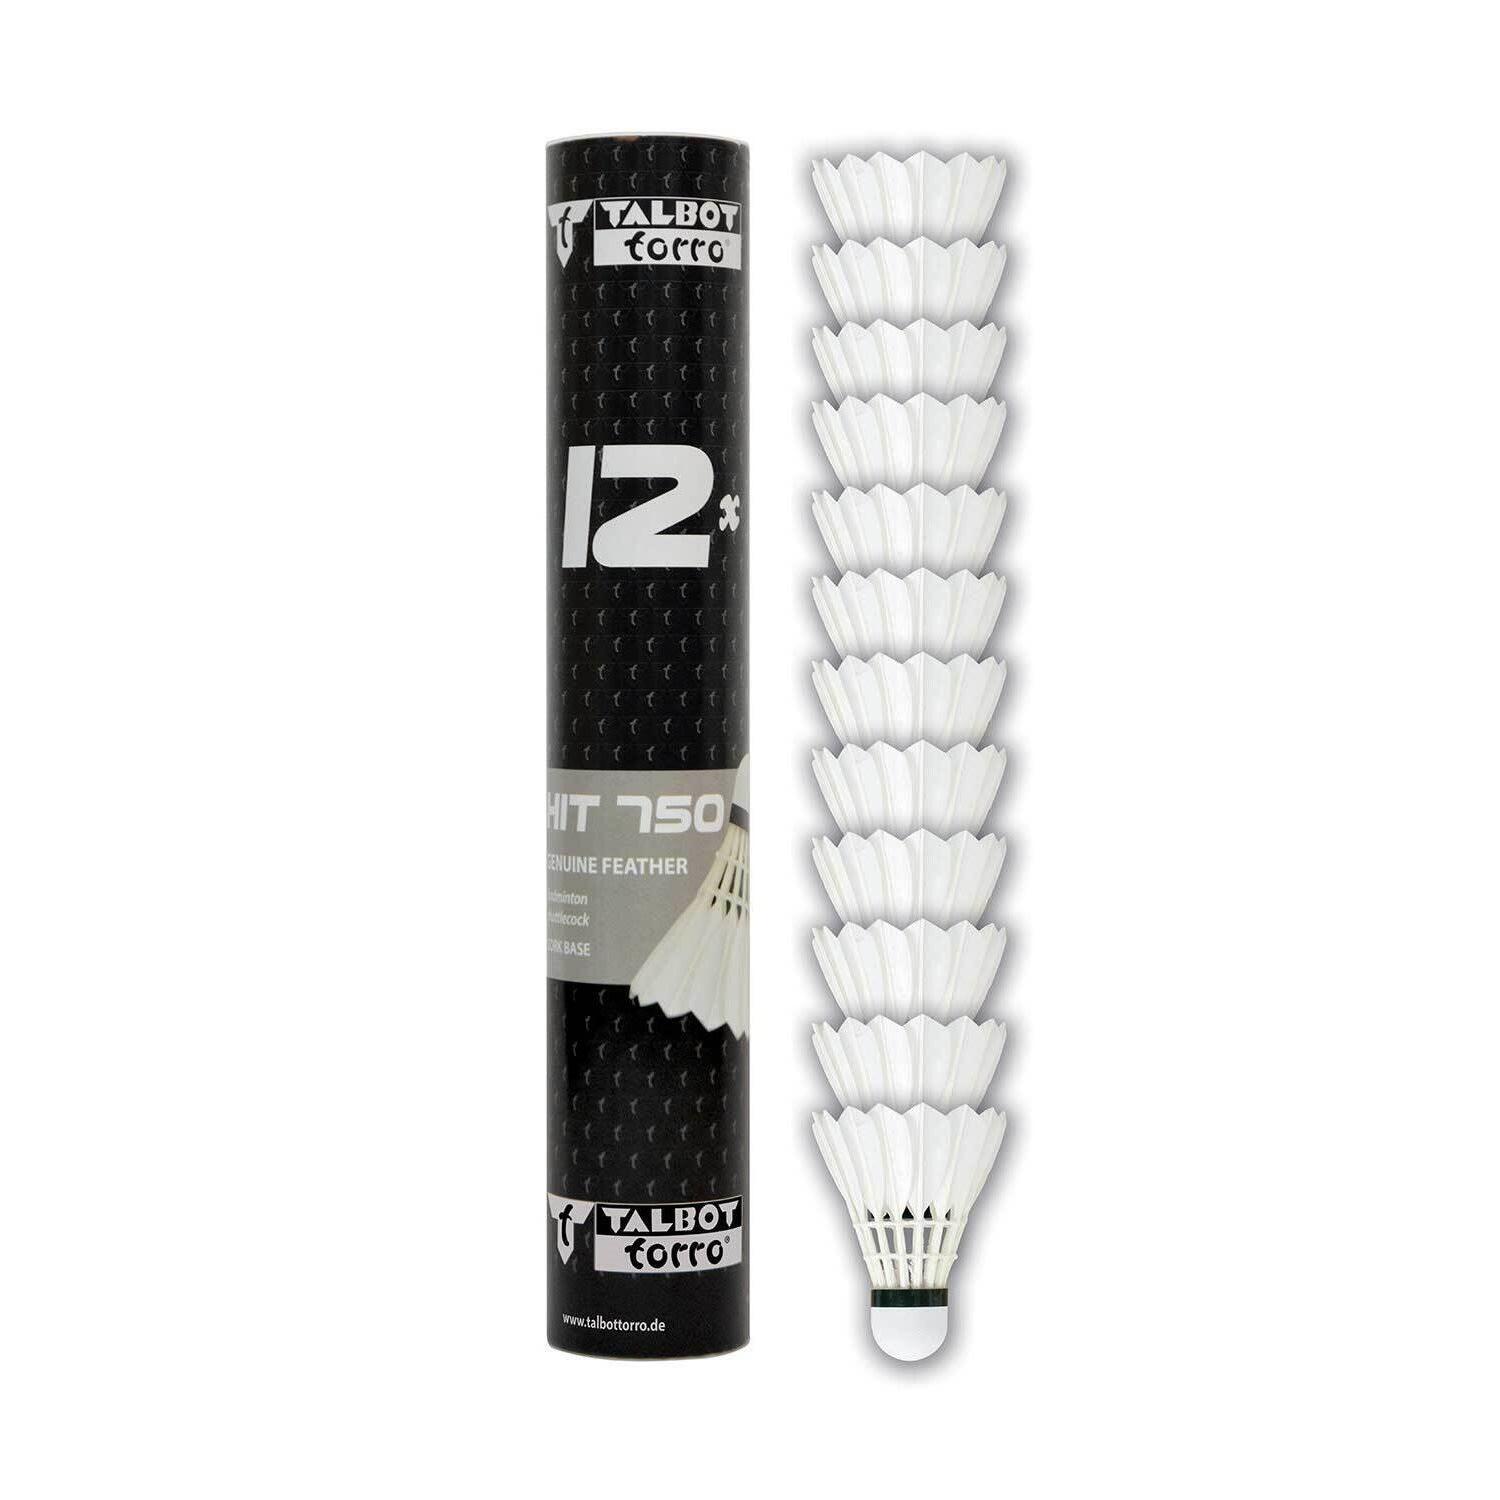 Hit 750 Feather Shuttlecock (Pack of 12) (White) 2/3